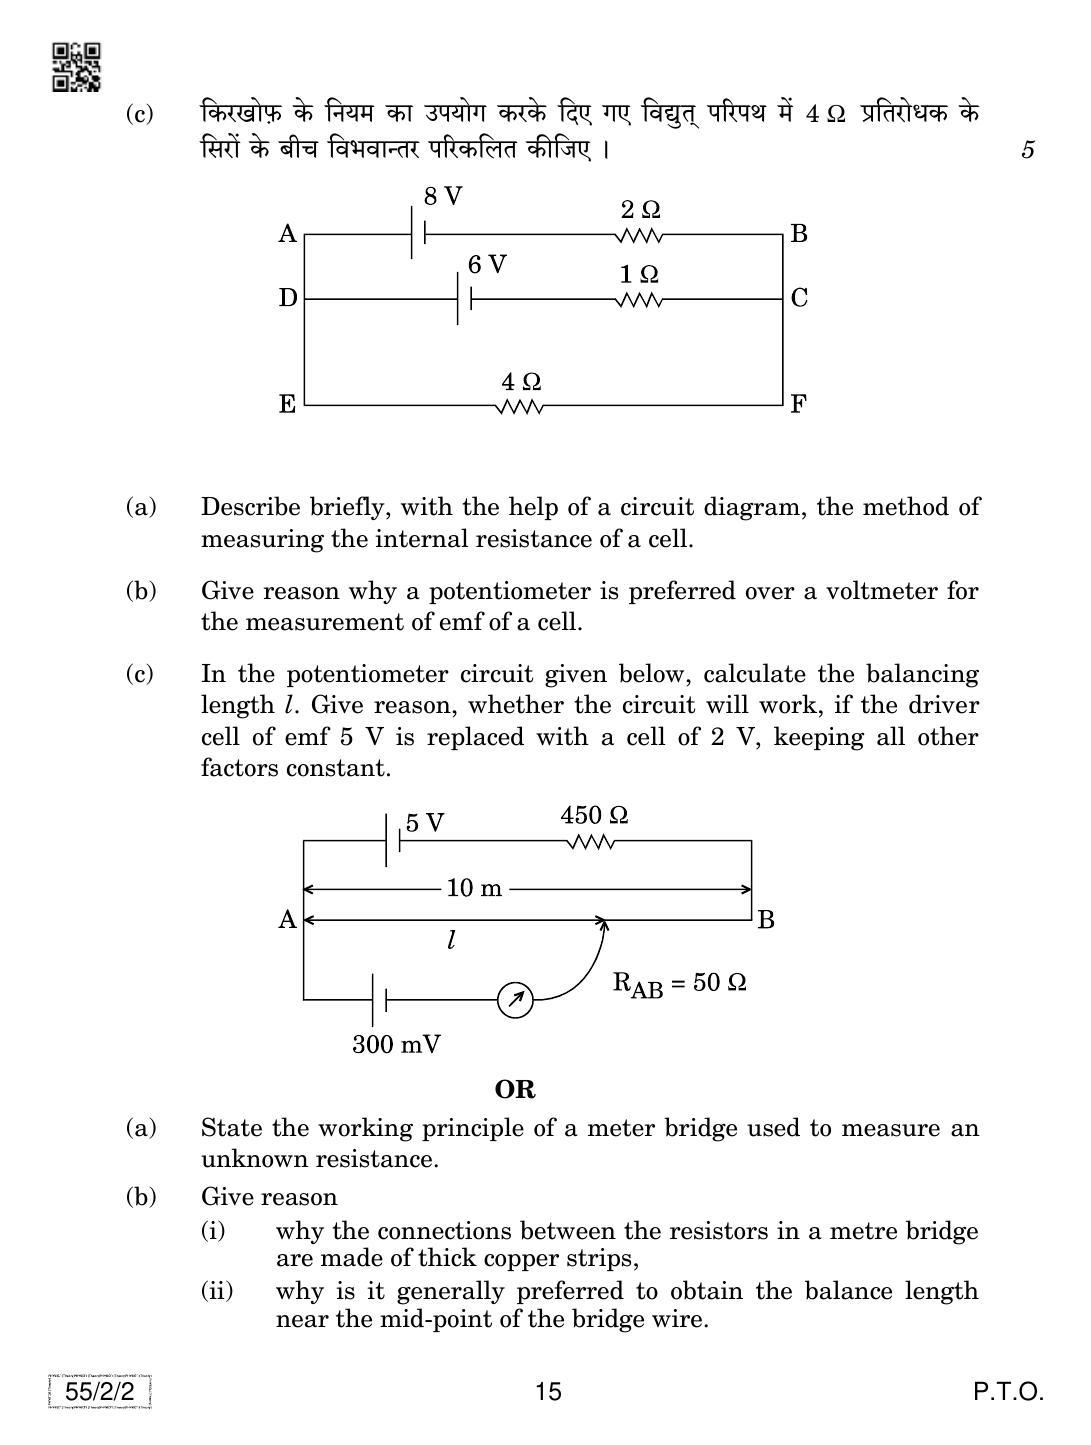 CBSE Class 12 55-2-2 Physics 2019 Question Paper - Page 15